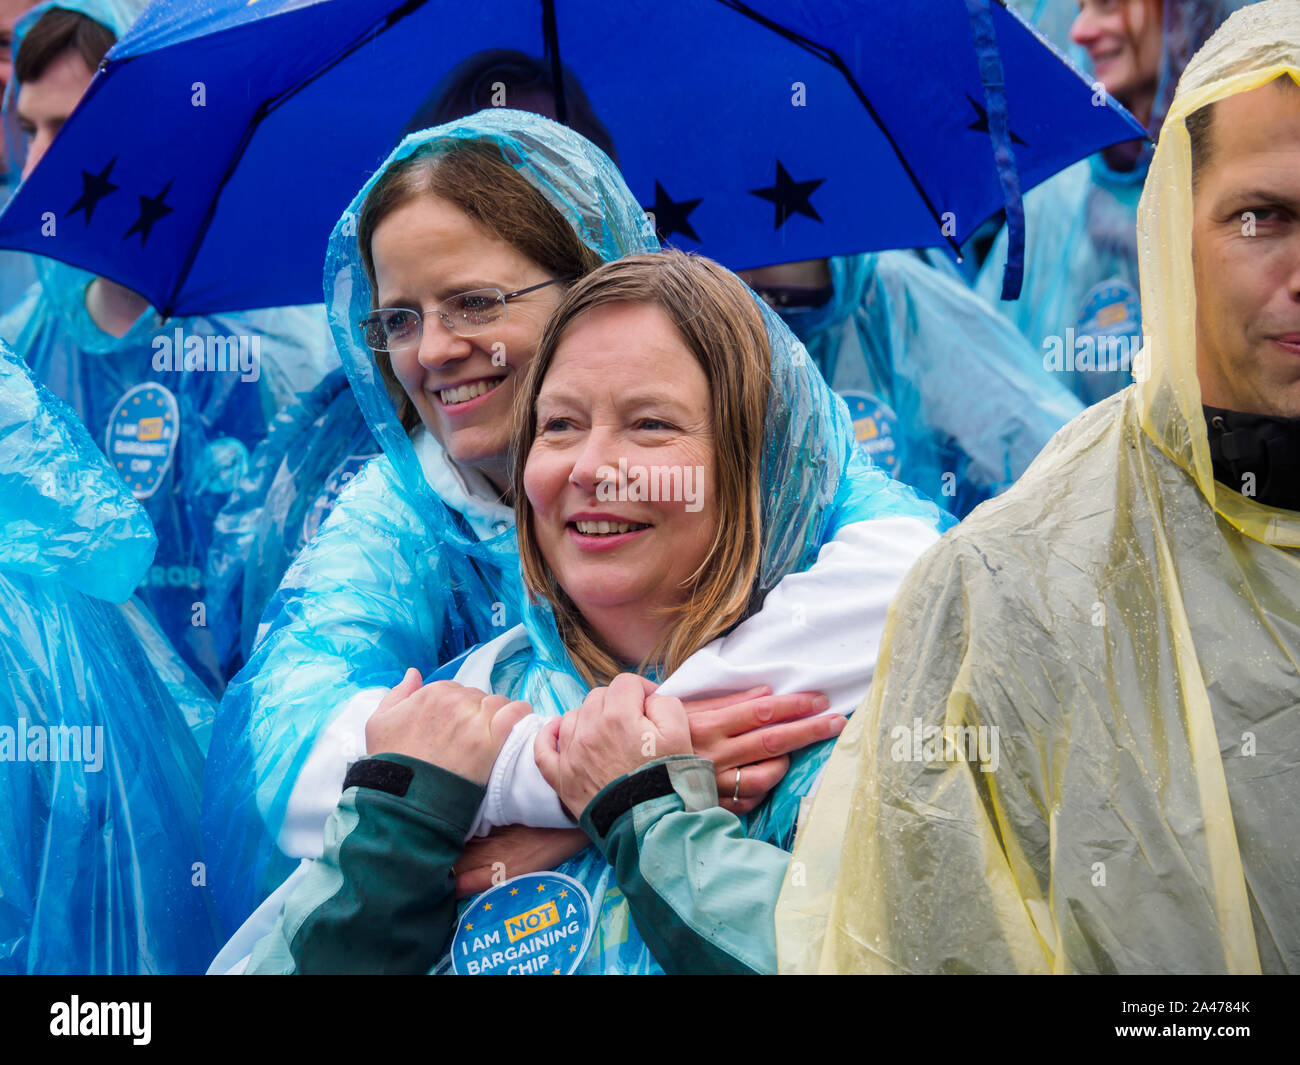 London, UK. 12th October 2019. Some of the 3 million EU citizens residents in the UK at an event organised by the3million organisation to express their love for the UK and to remind the Prime Minister ofe his broken promise to us on 1 June 2016. They wore ponchos in the blue and yellow of the European flag. The government settlement scheme is full of flaws and many who have applied have not been granted settled status, and government minister Brandon Lewis has stated that those who have failed to achieve it risk deportation. They held up copies of Vote Leave's broken promise and tore it up. Pe Stock Photo